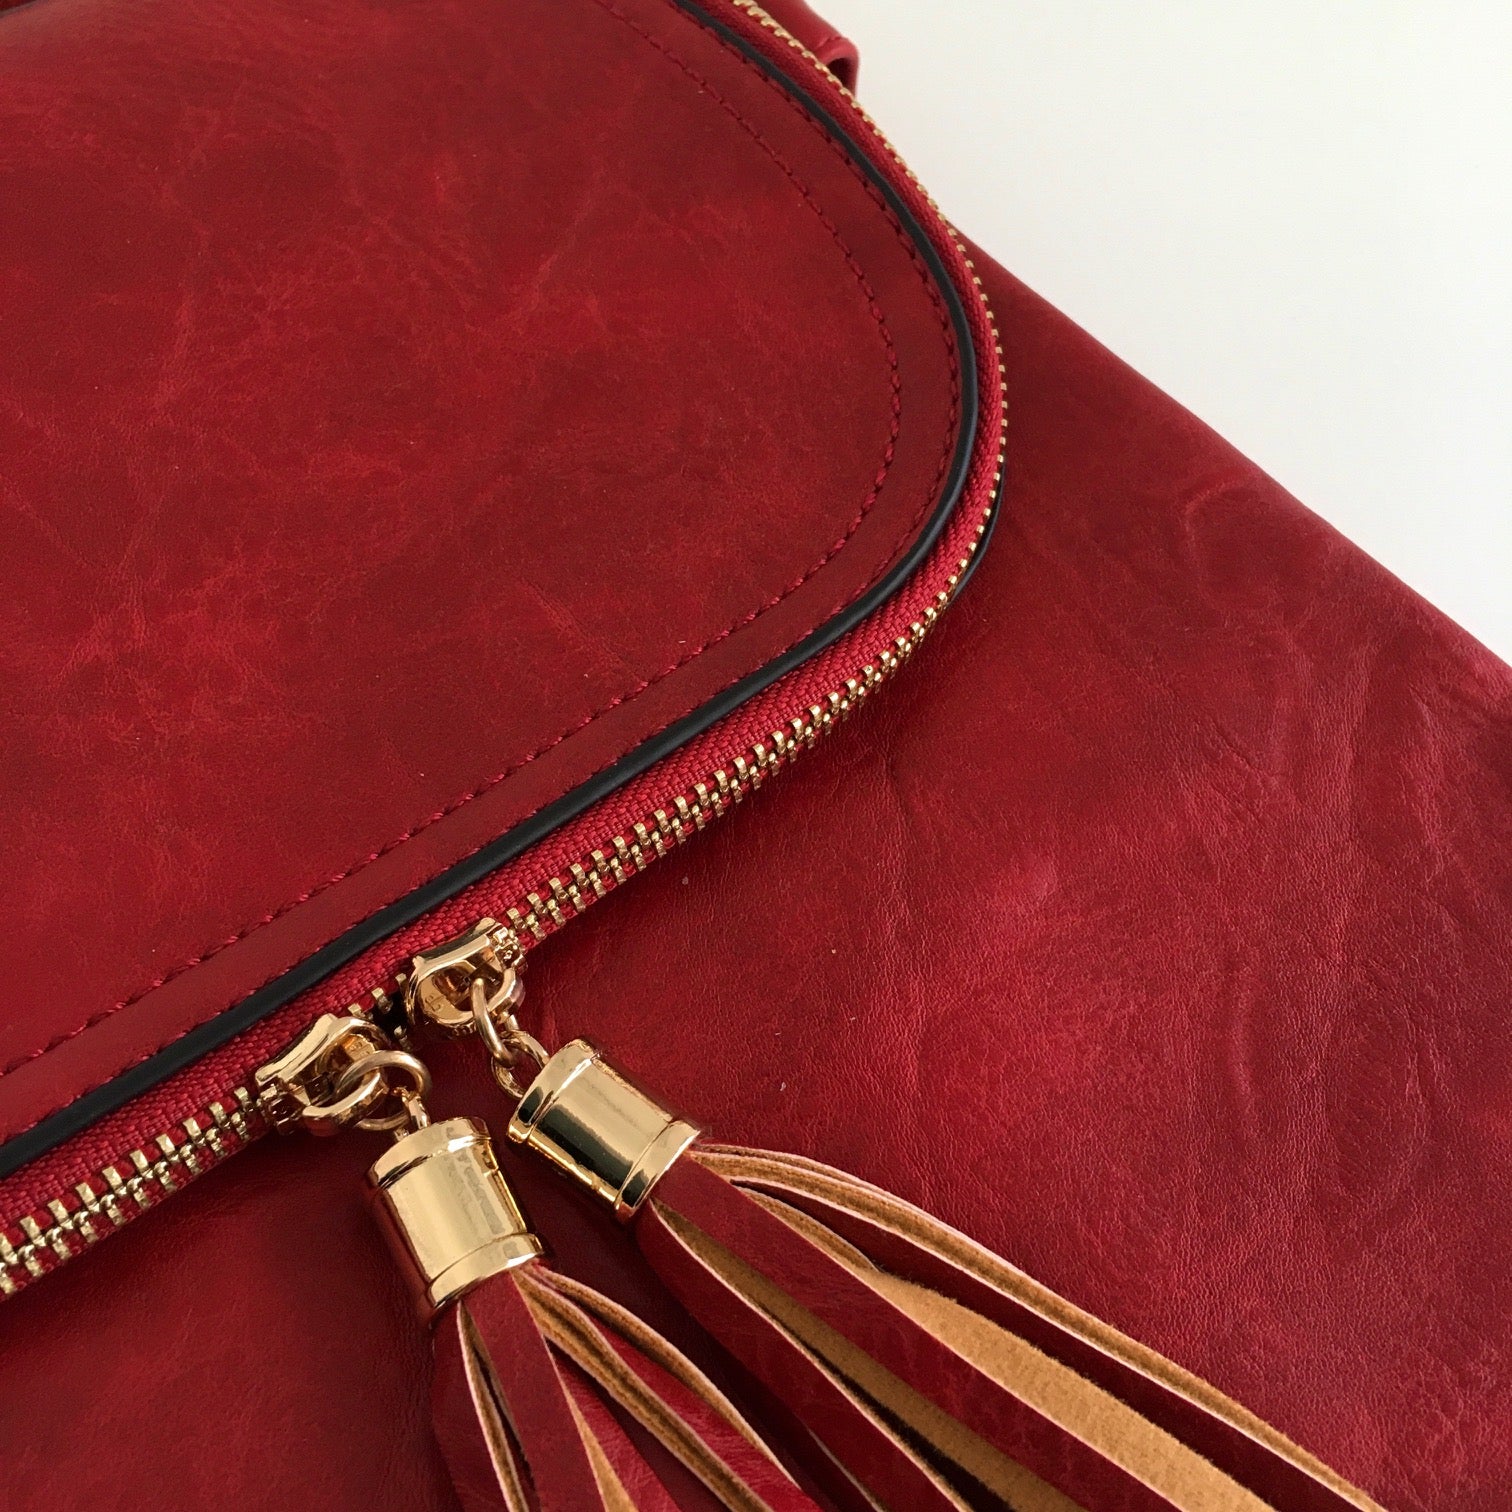 A-SHU LARGE RED TASSEL MULTI COMPARTMENT CROSS BODY SHOULDER BAG WITH LONG STRAP - A-SHU.CO.UK